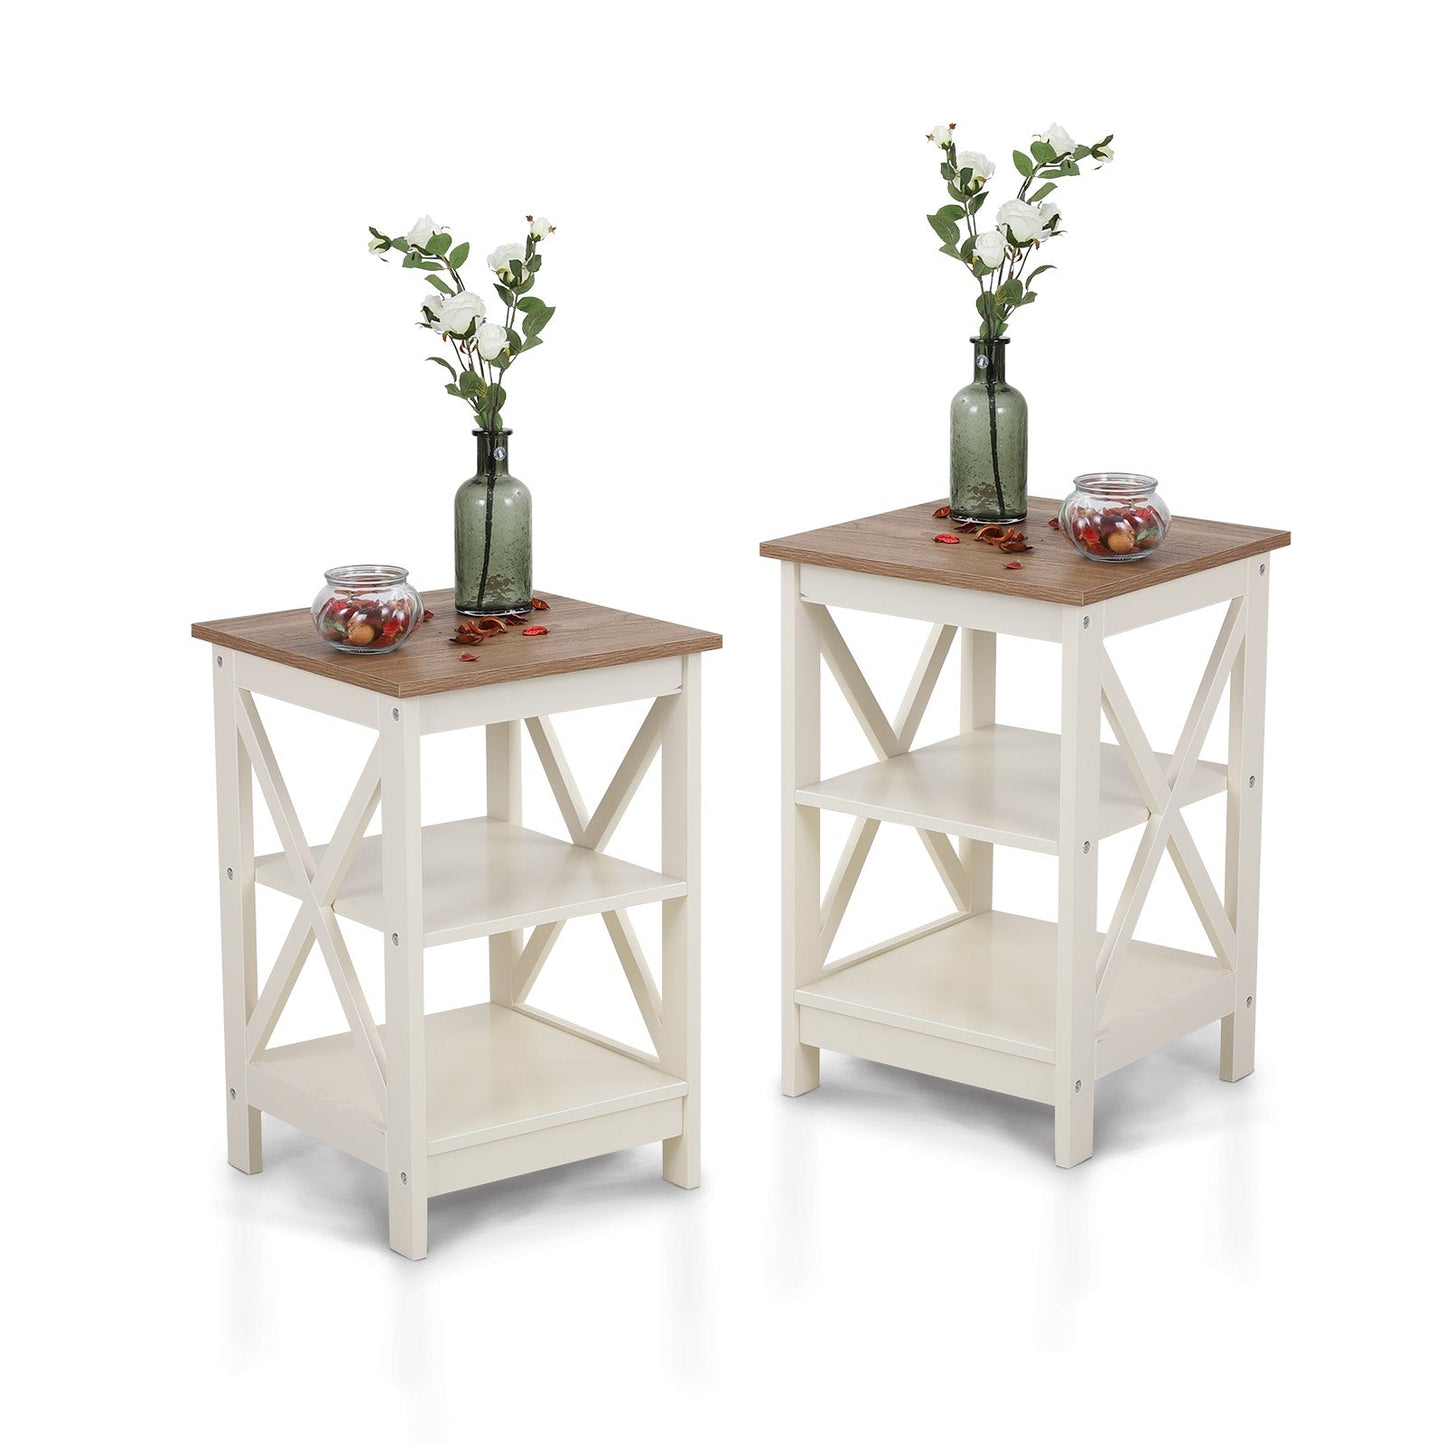 Sophia&William Narrow End Table Nightstand Side Table Bedside Table Sofa Table-Set of 2